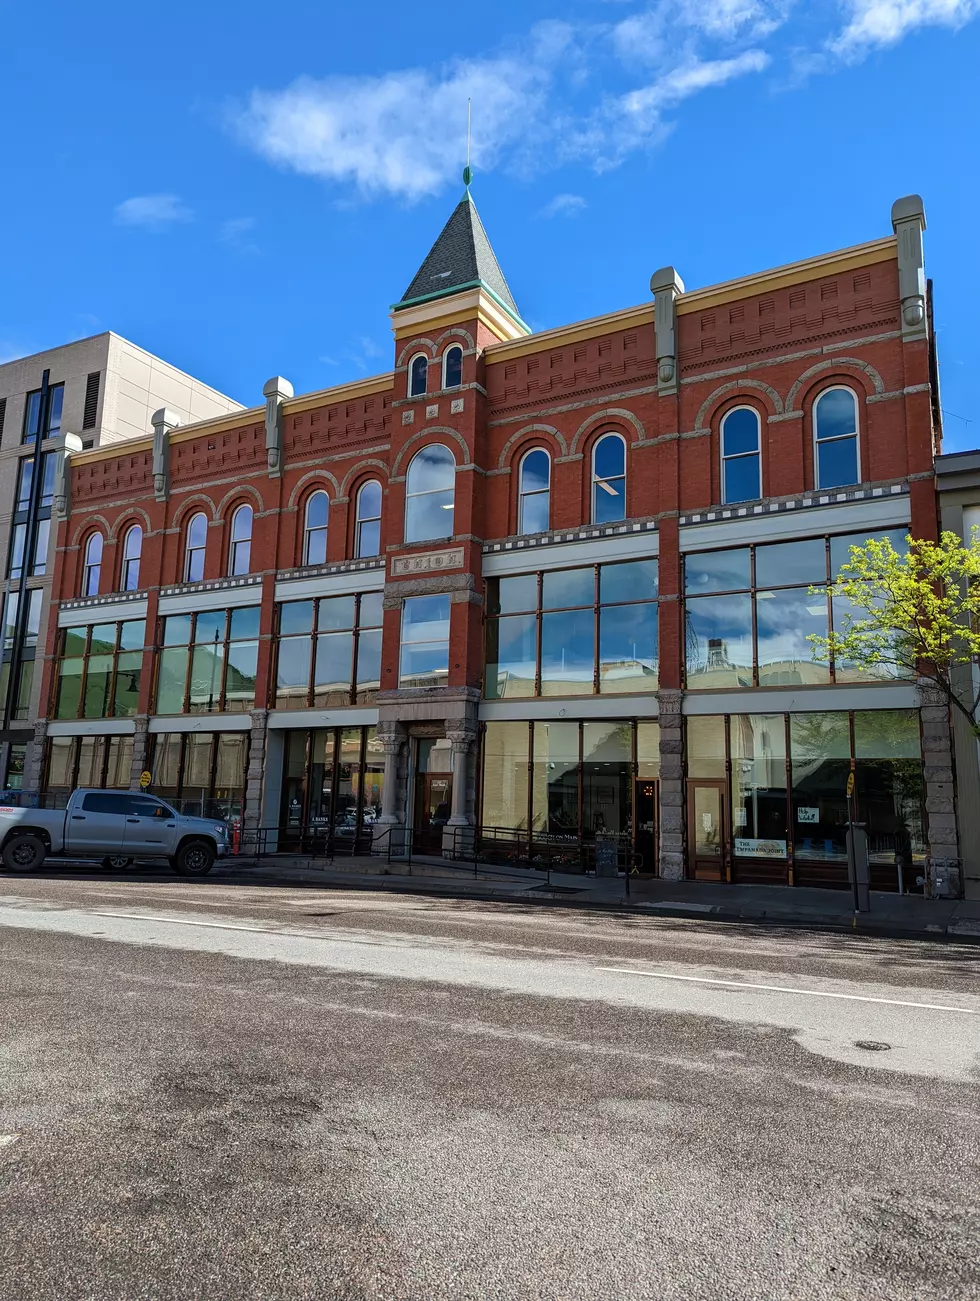 Grand Opening Announced for Iconic Renovated Missoula Building